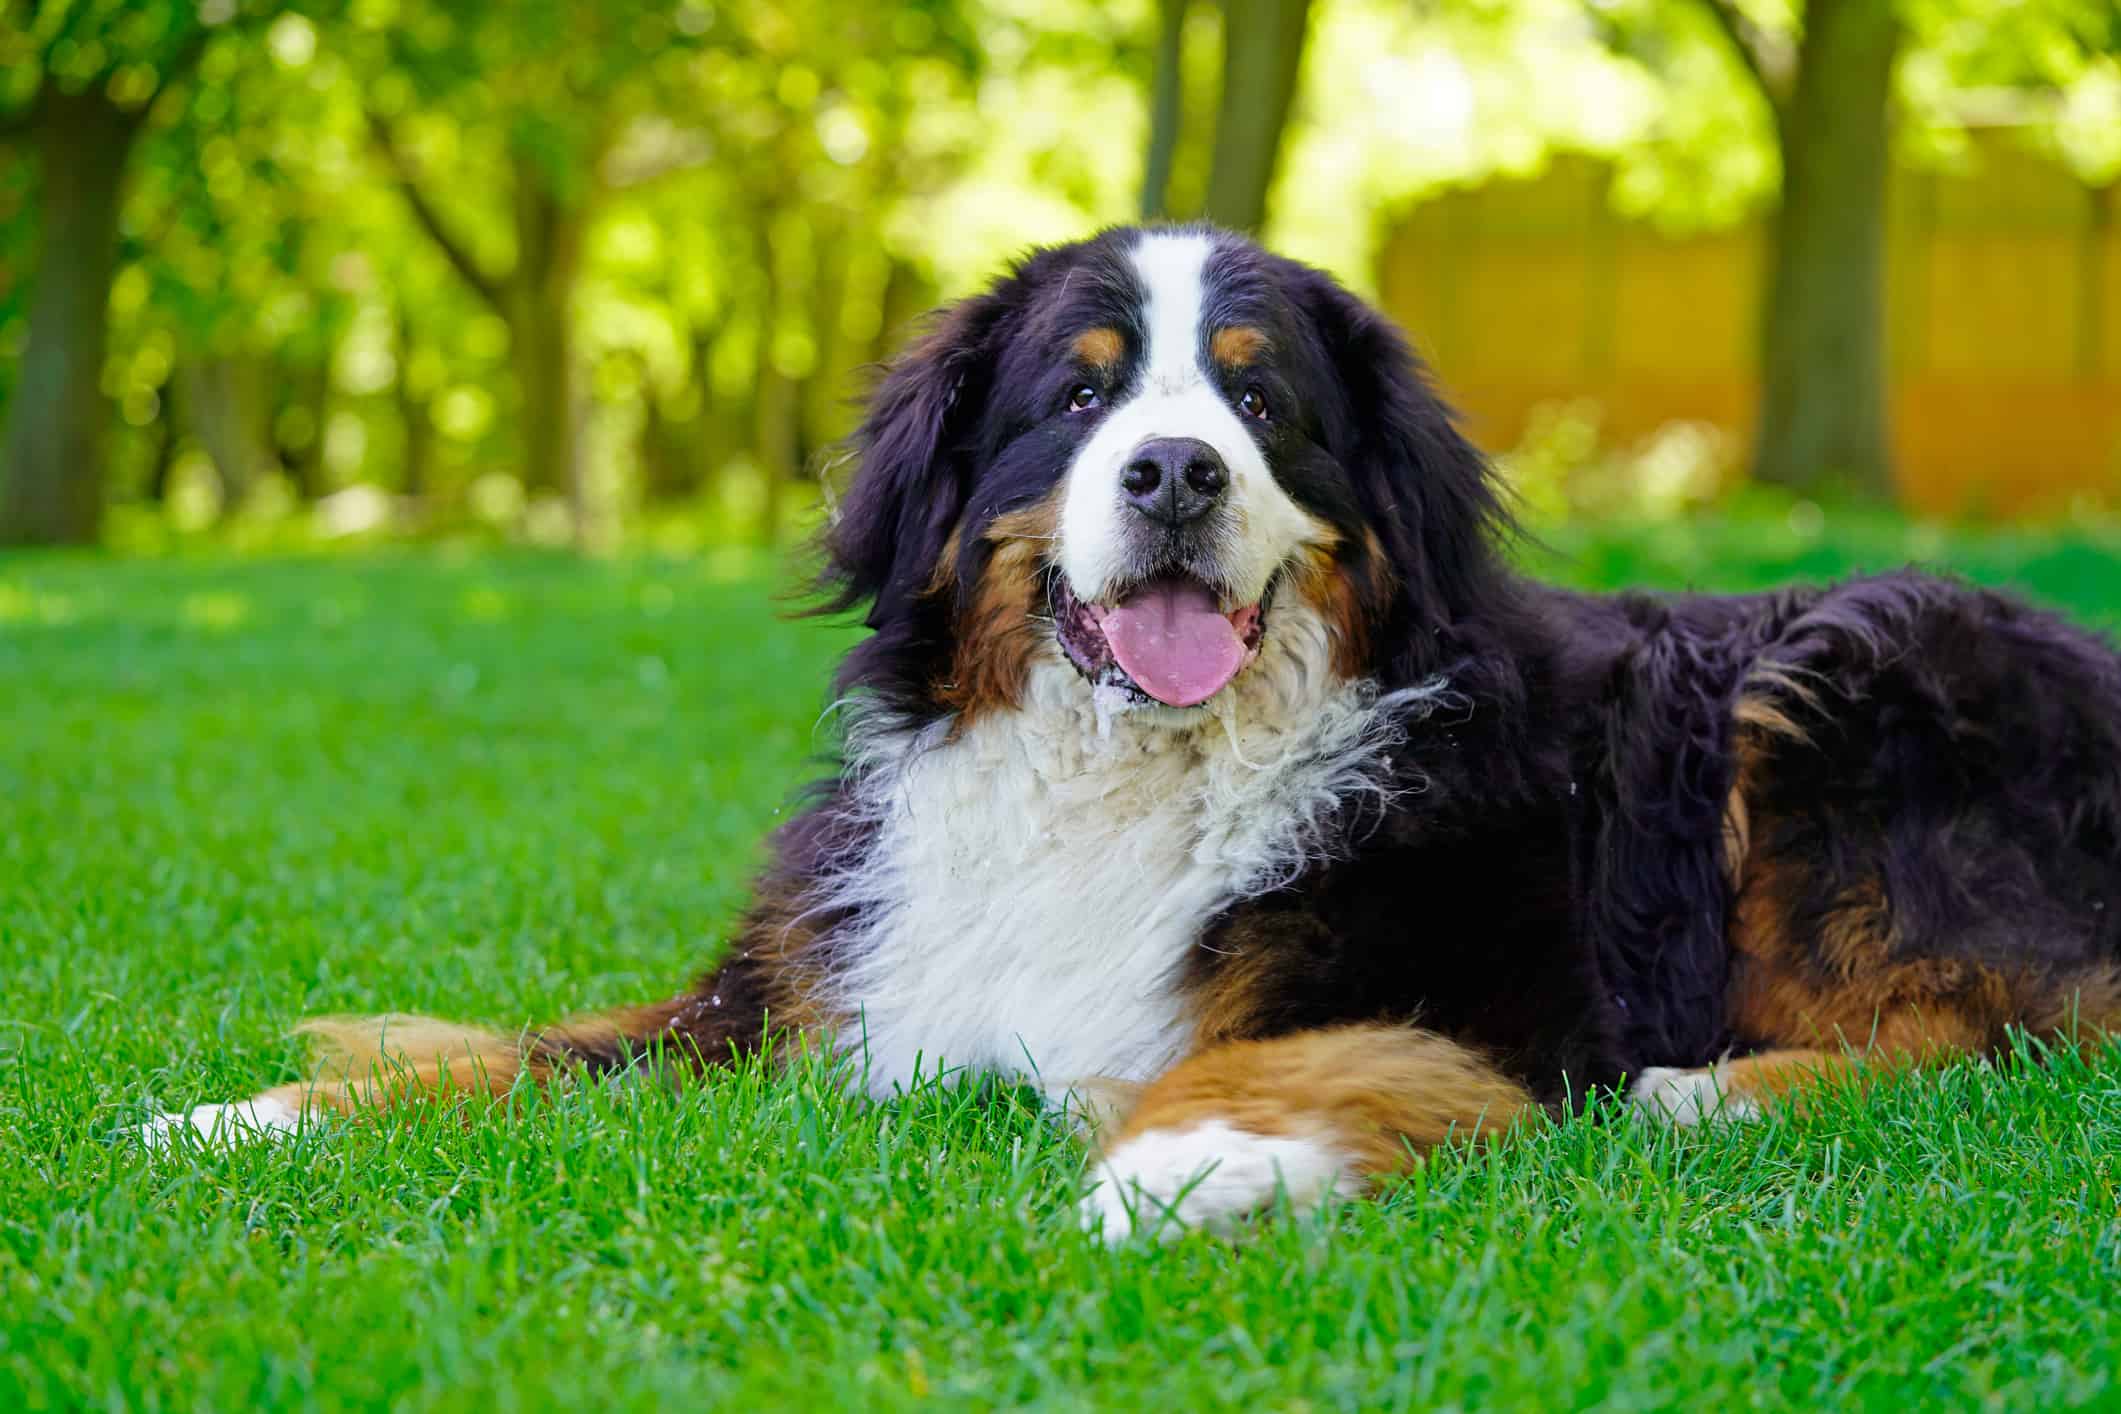 Large Bernese Mountain Dog lying on the grass in the park, panting.